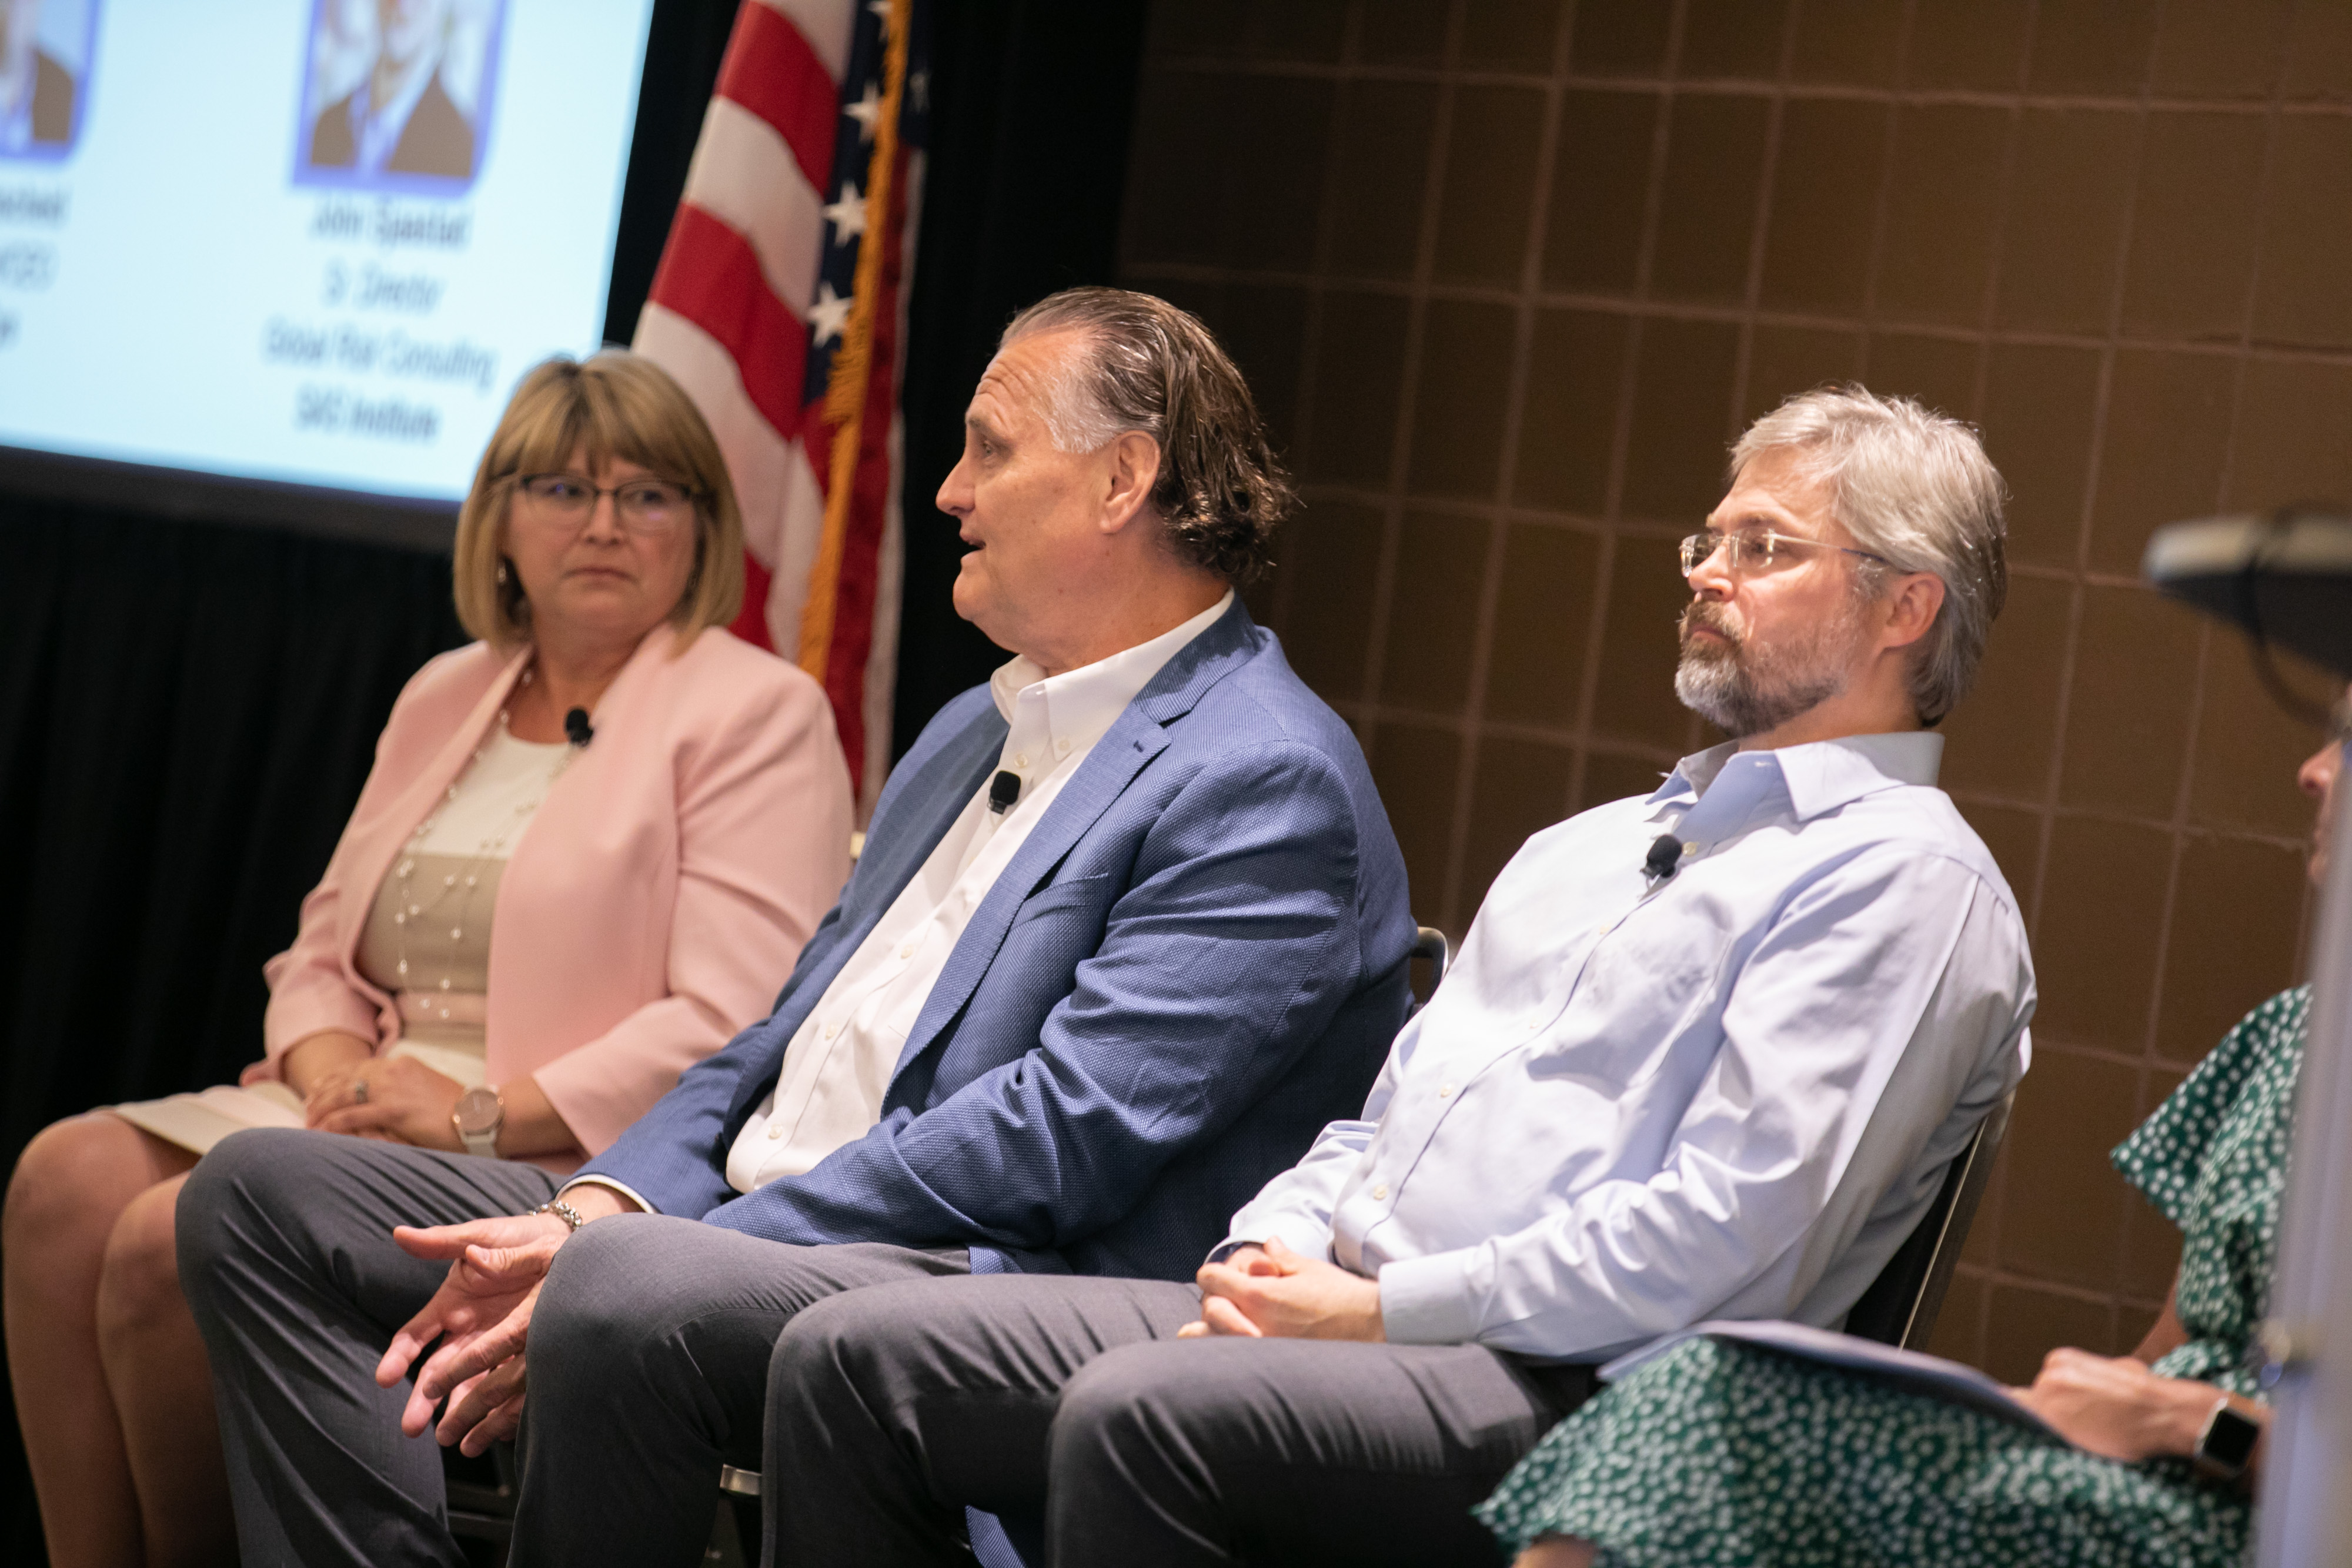 5 CECL Panel Discussion Takeaways from 2019 Annual Conference